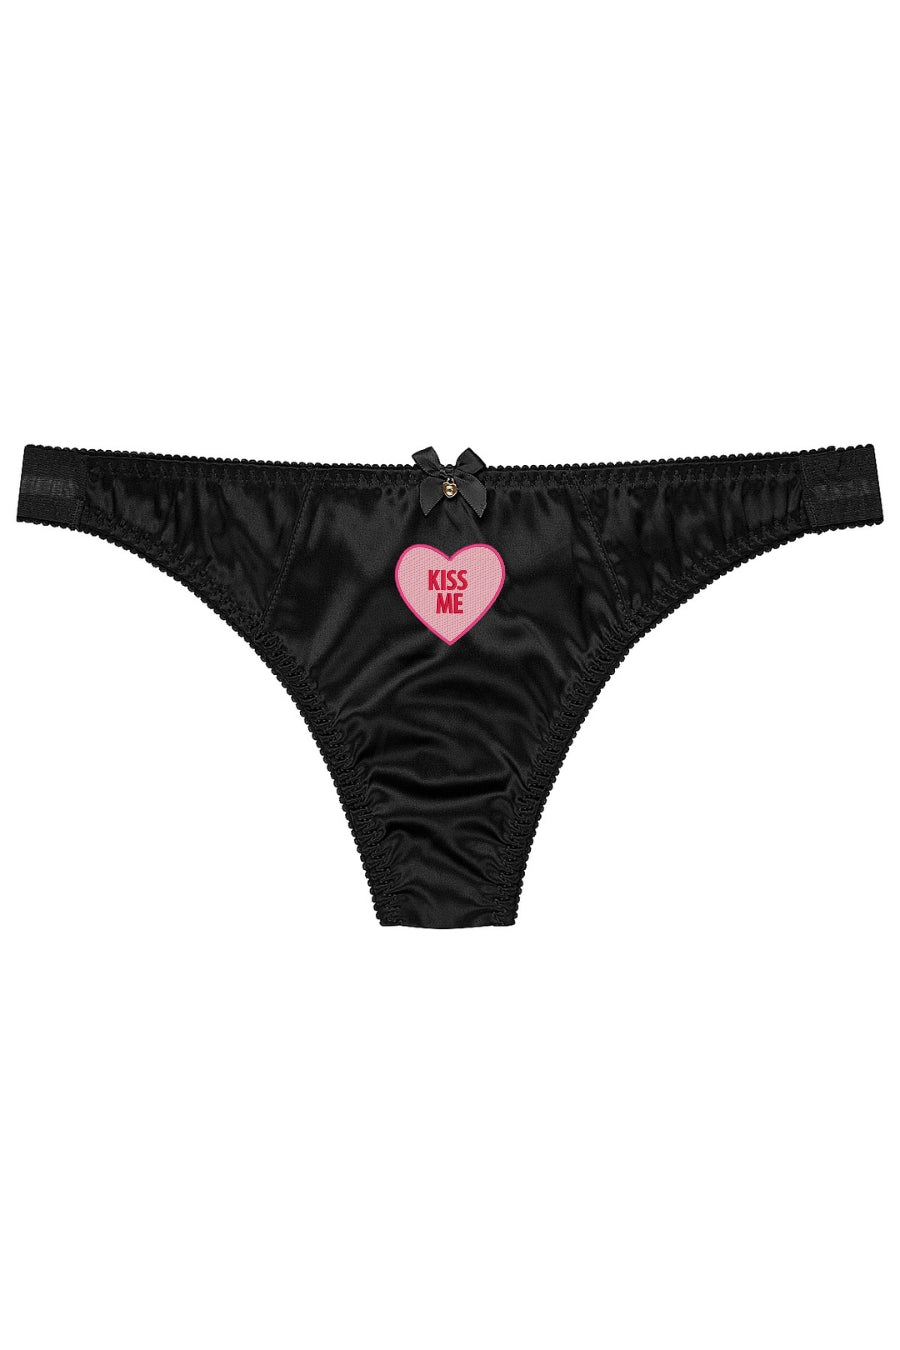 Kiss Me: Embroidered Knickers